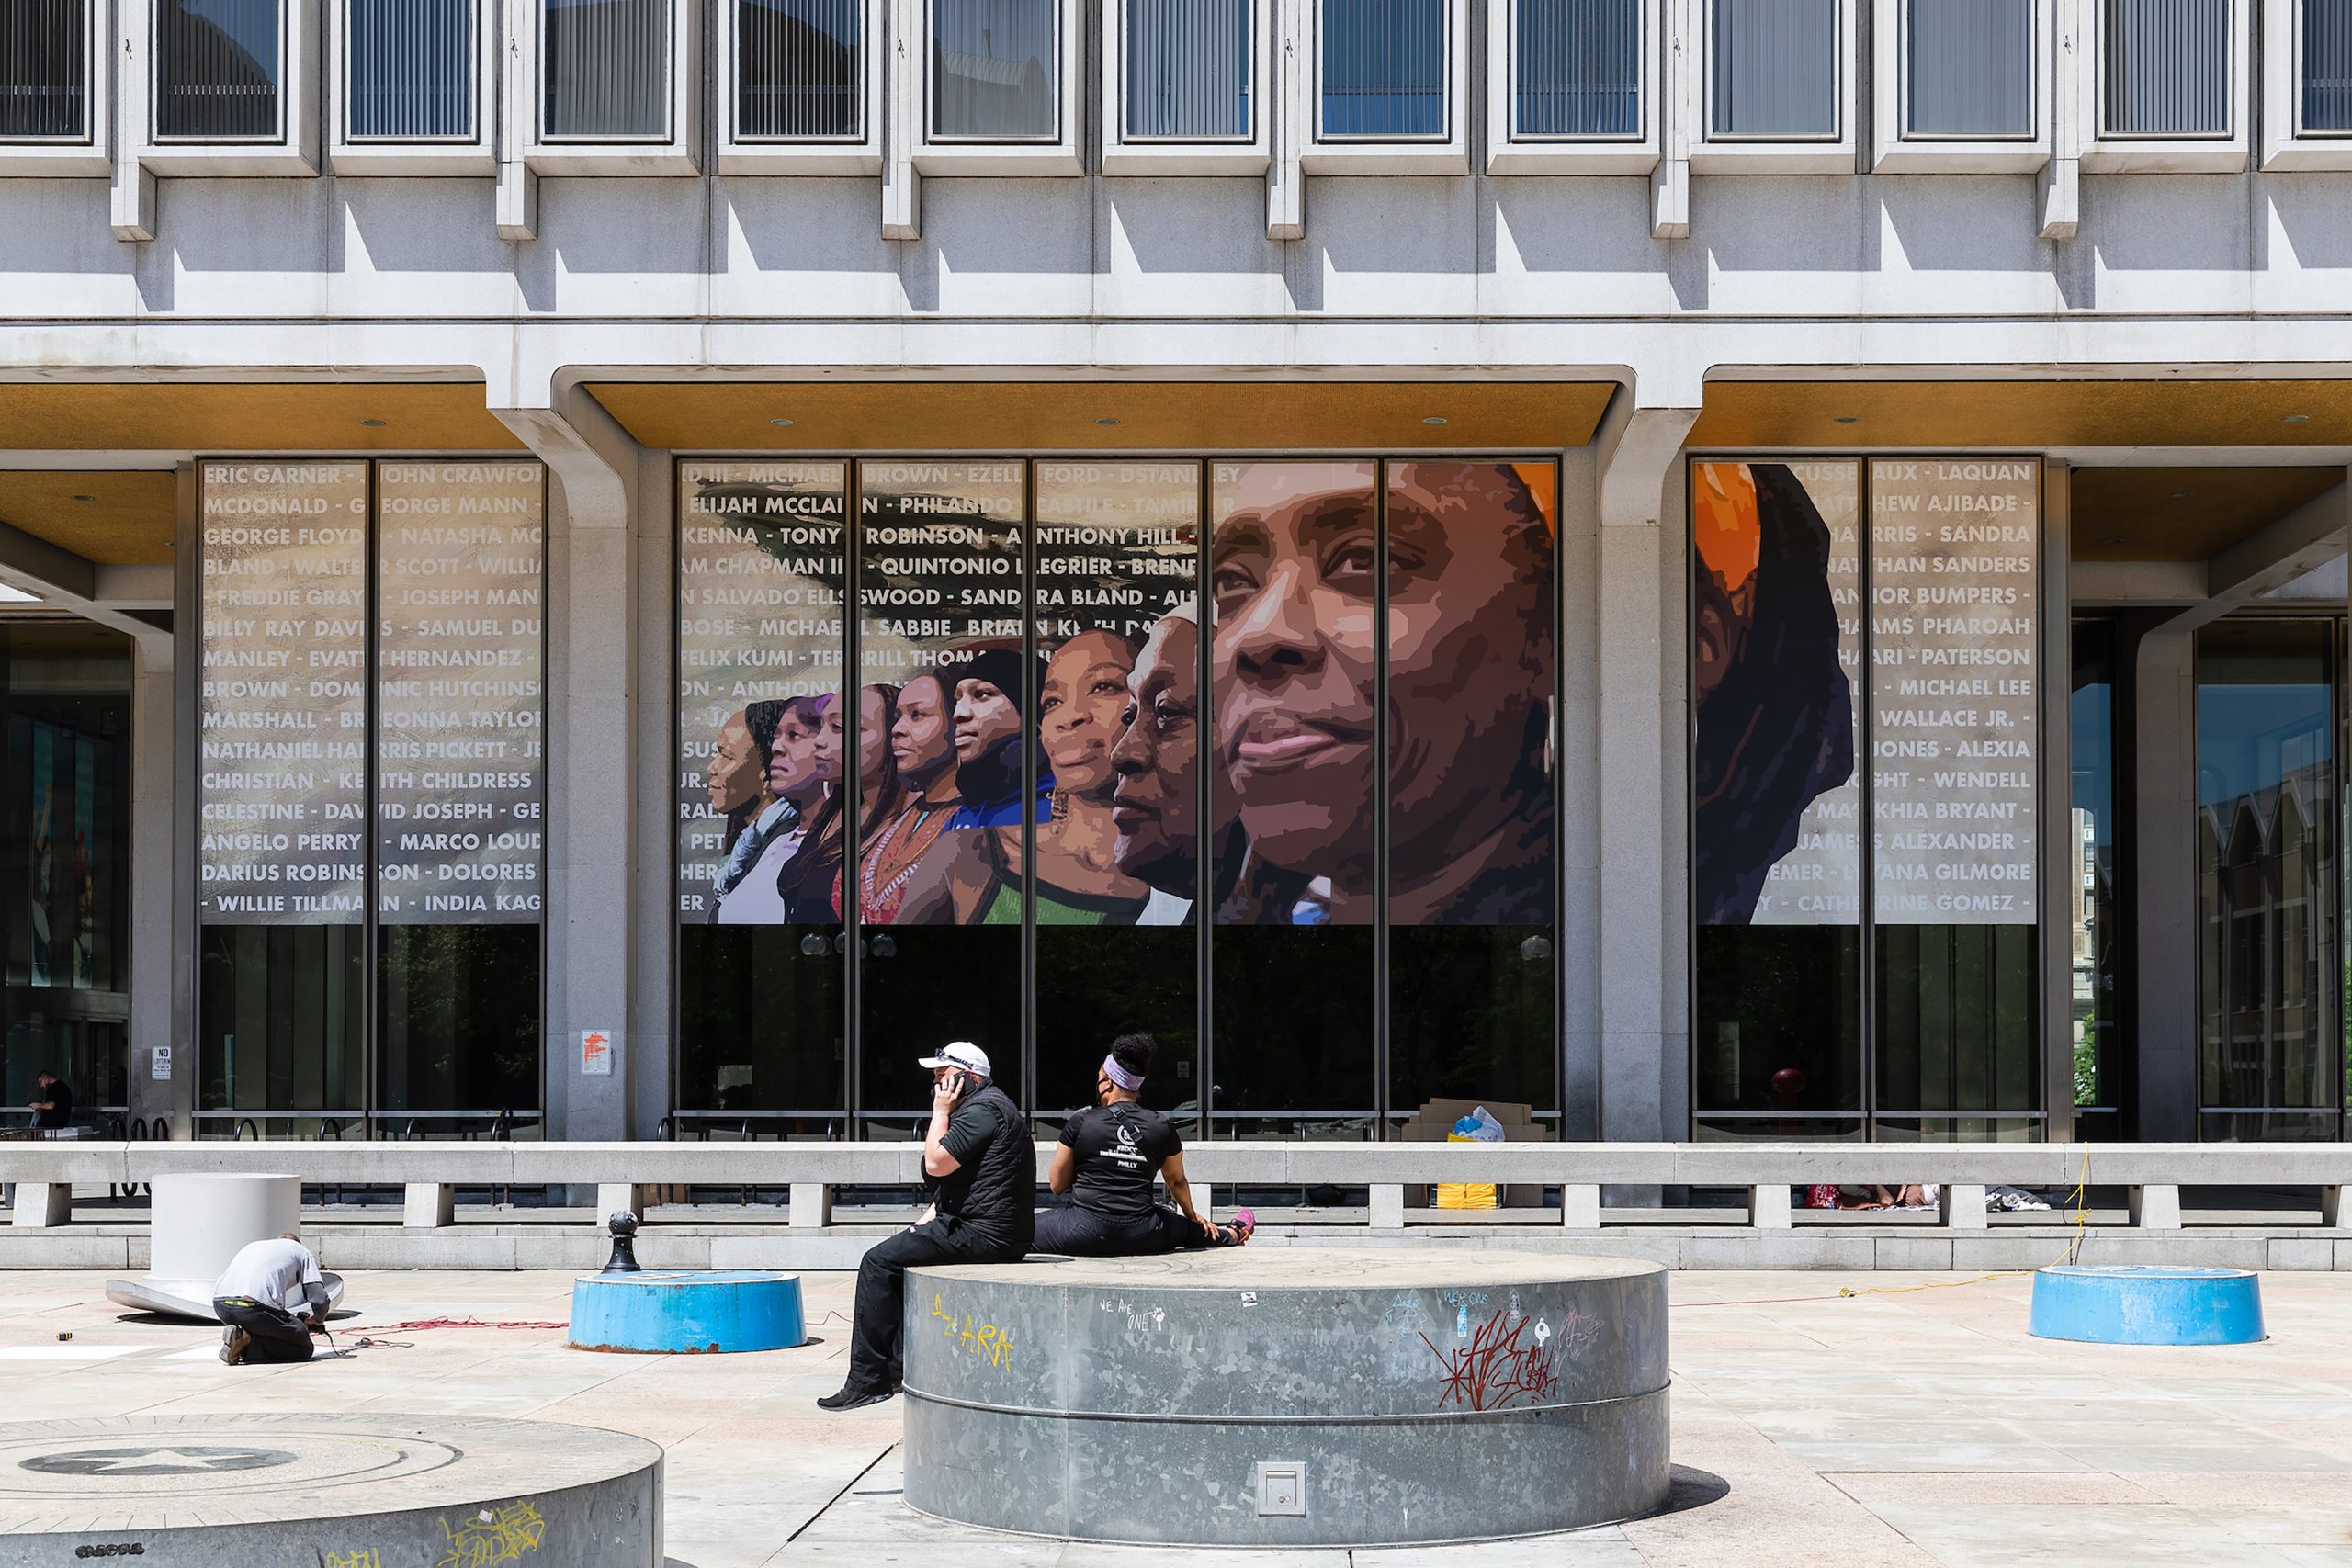 A public mural depicts Black women activists standing in a line of strength appear against a background showing the names of people recently killed by police brutality.